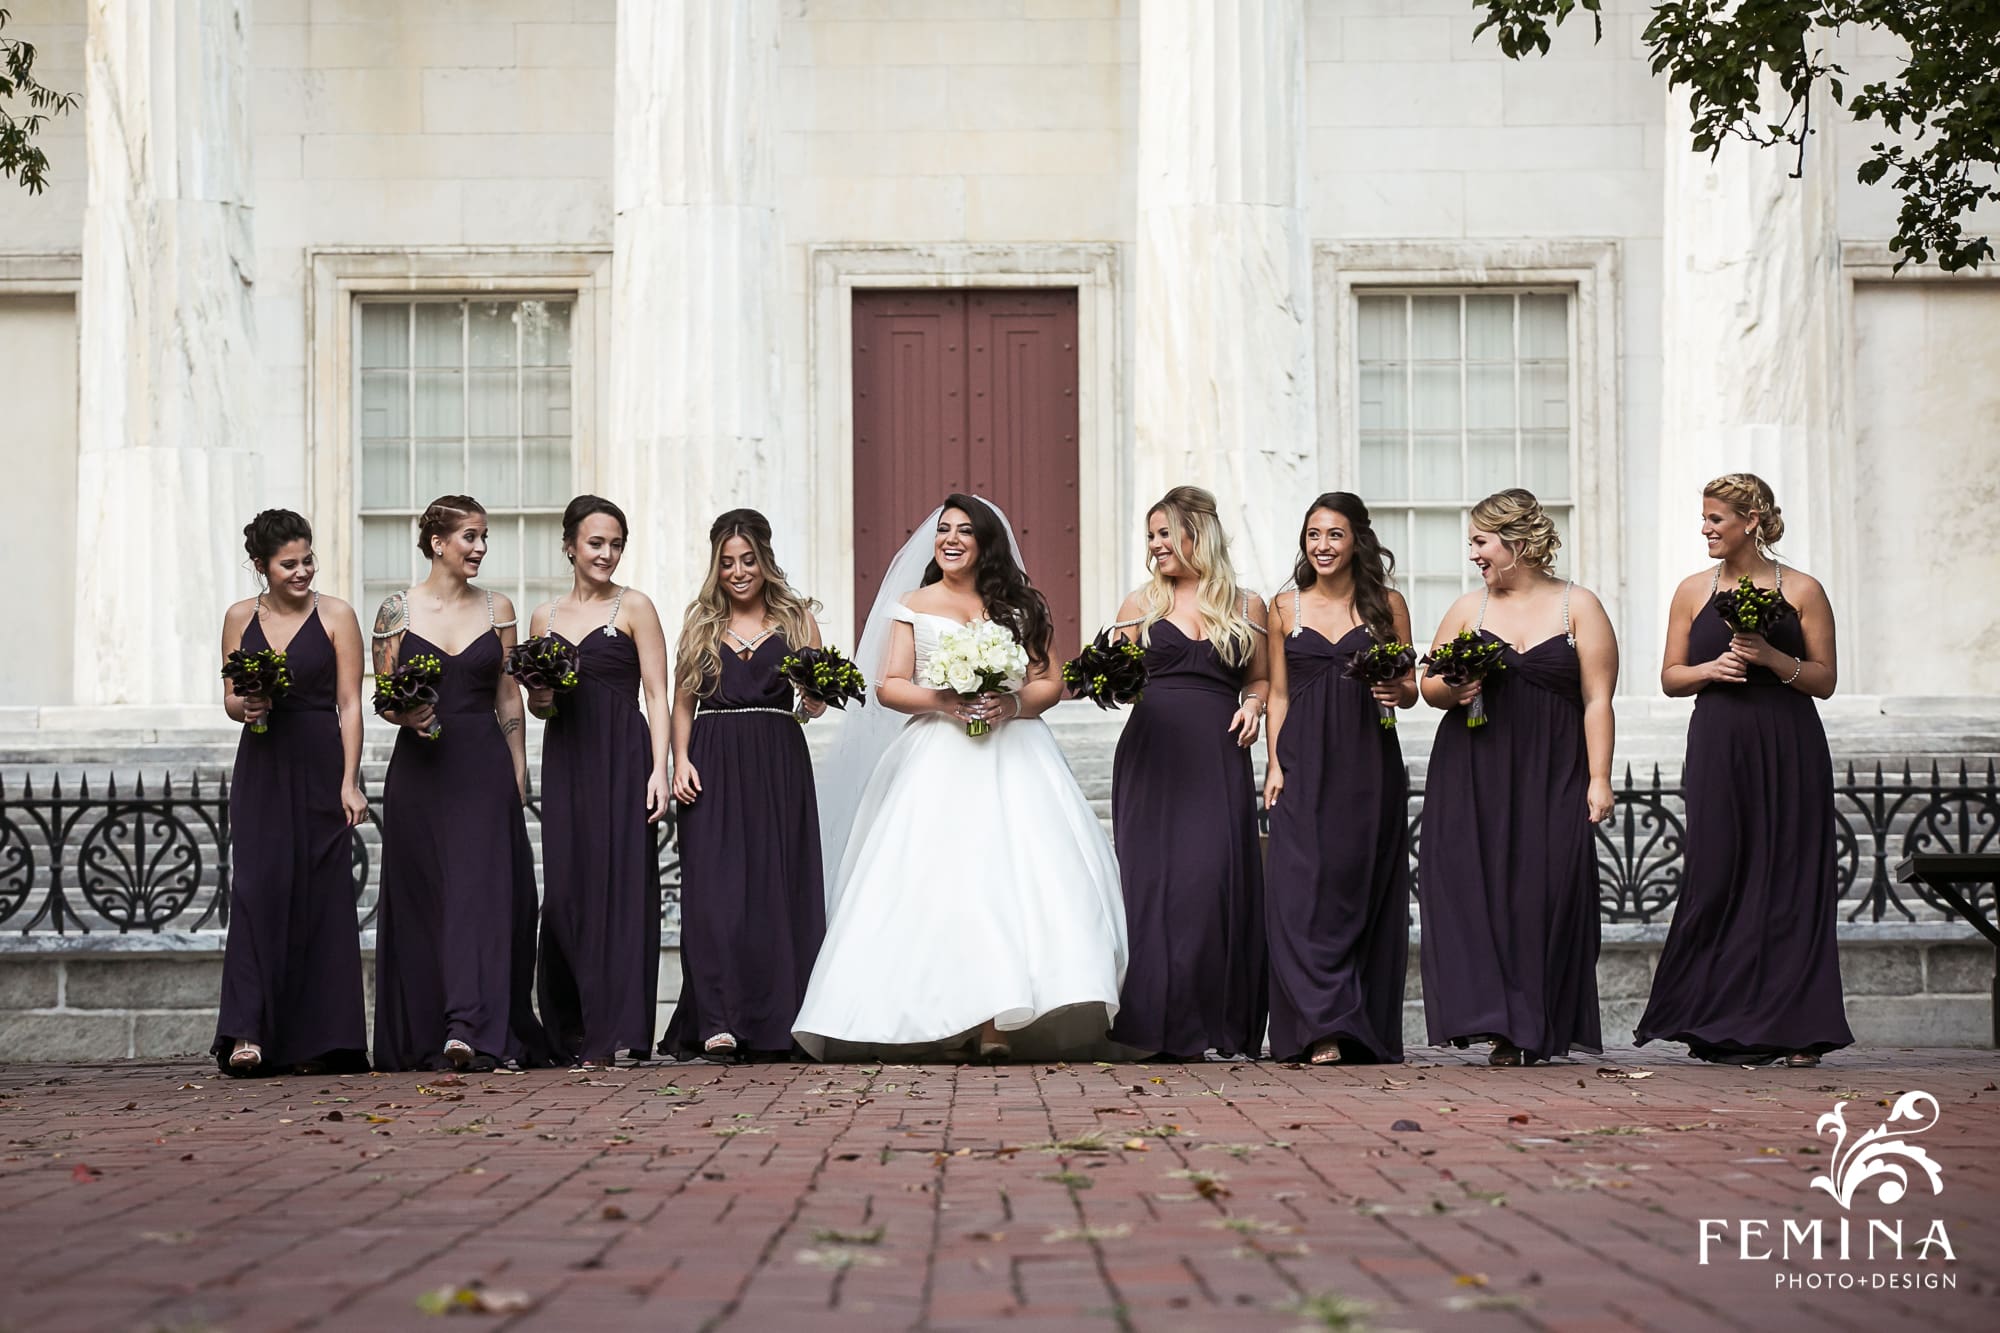 Christina and her bridesmaids walking in front of the 2nd Bank of the U.S. before her wedding at the Bellevue